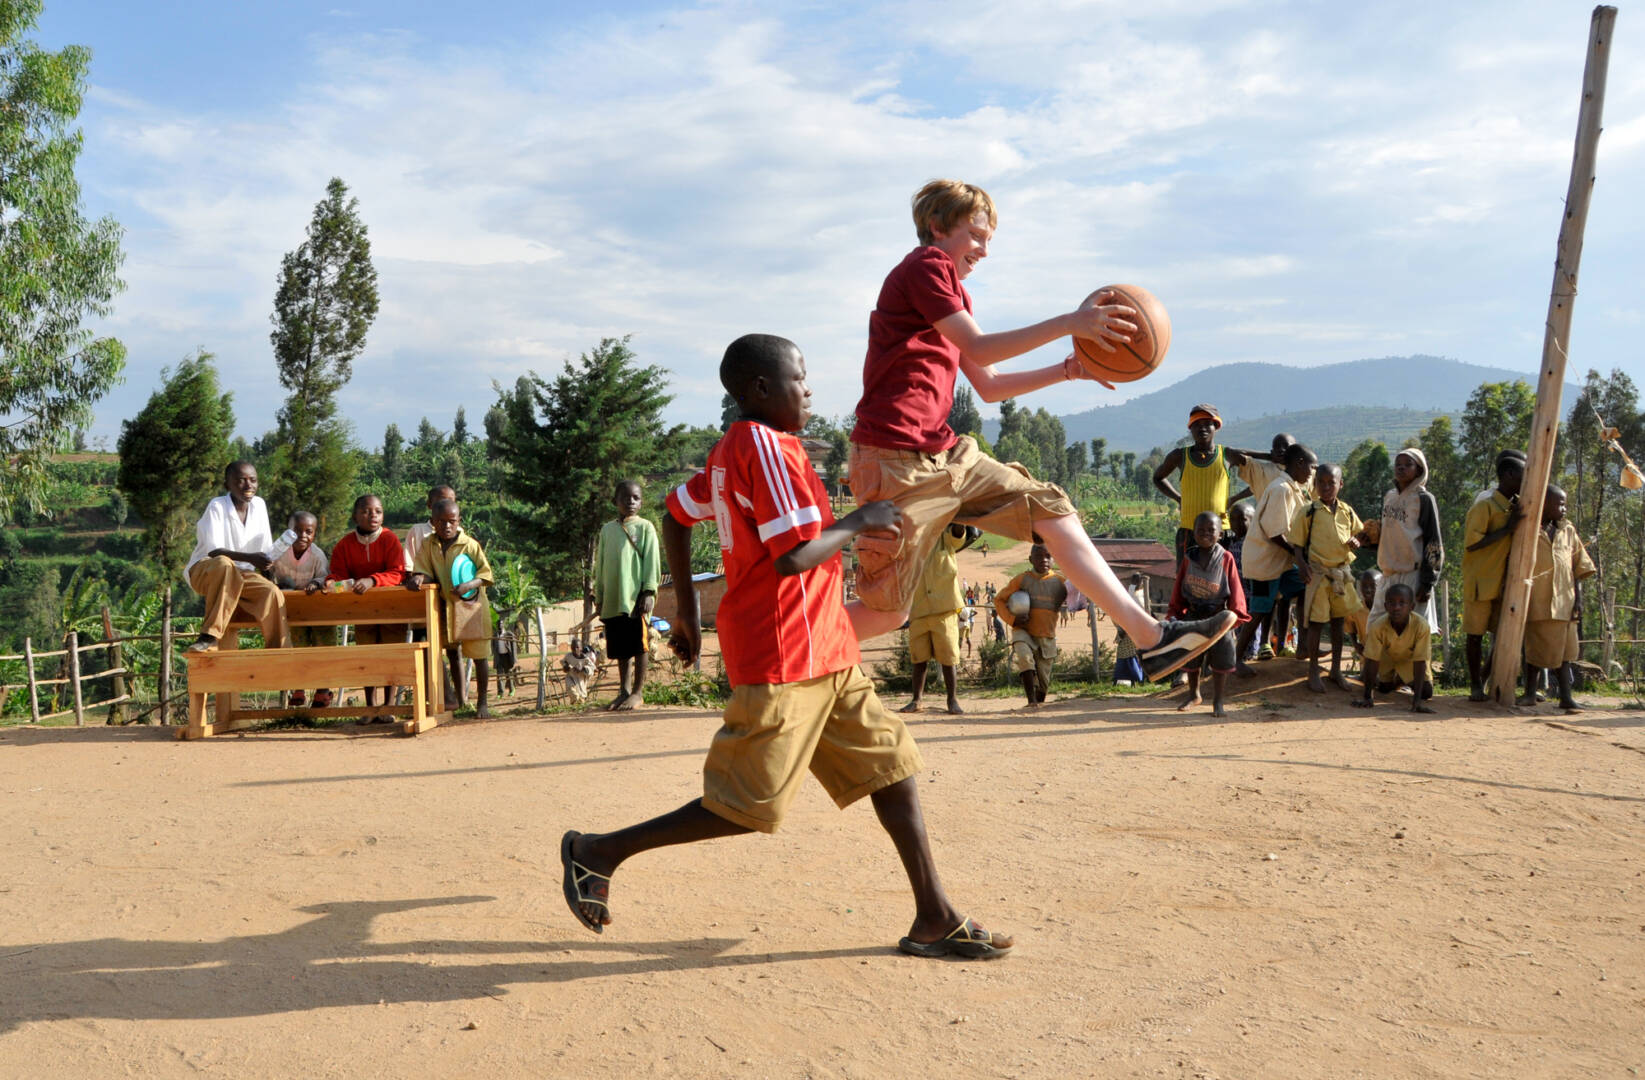 Two boys play basketball on a dirt court while being watched by a group of spectators.